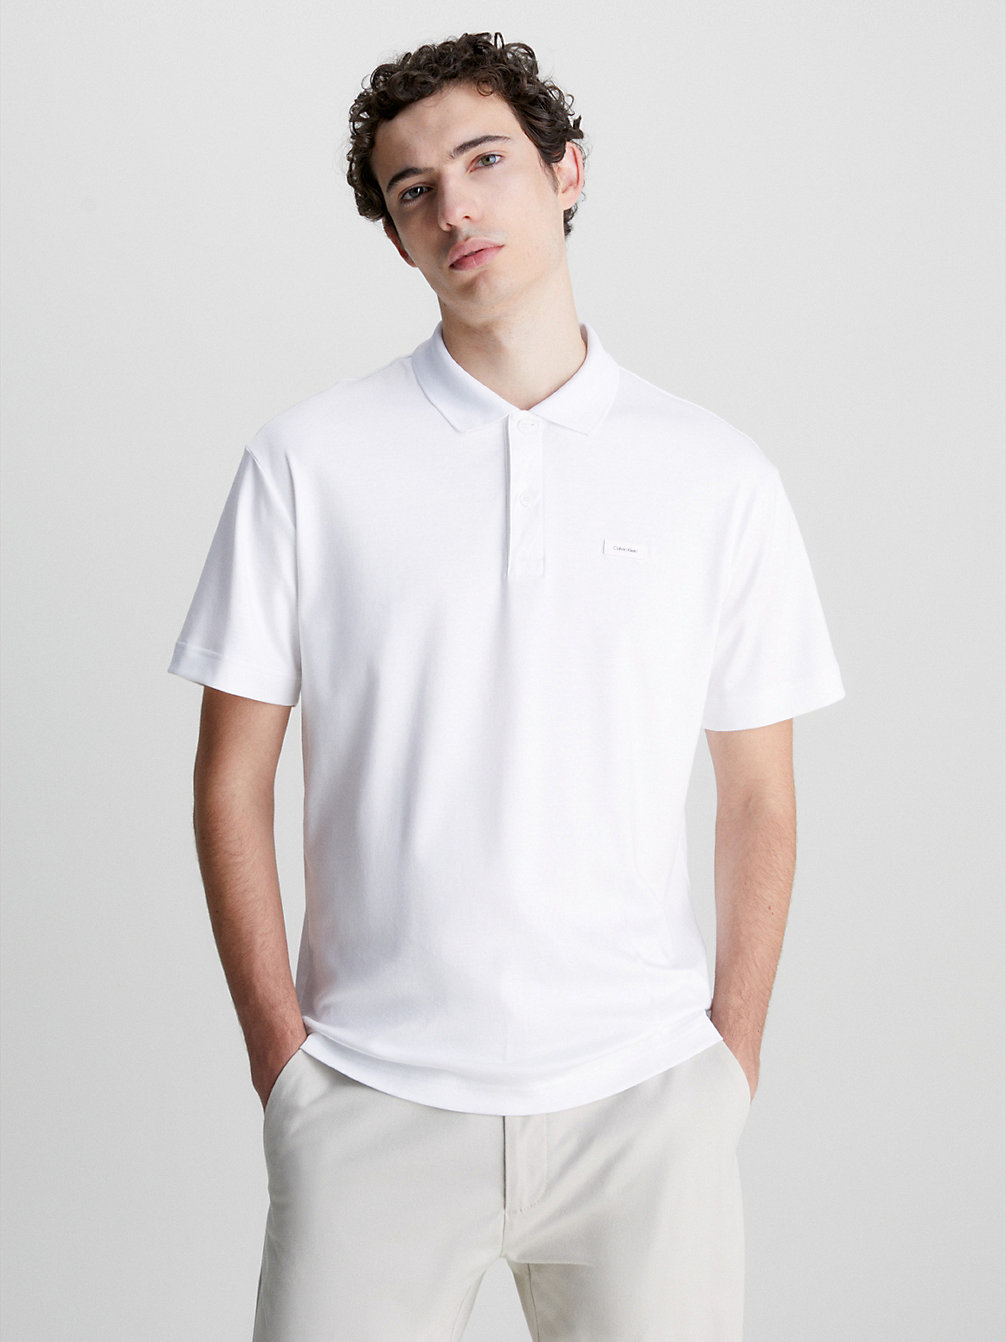 Poloregular Fit > BRIGHT WHITE > undefined hombre > Calvin Klein